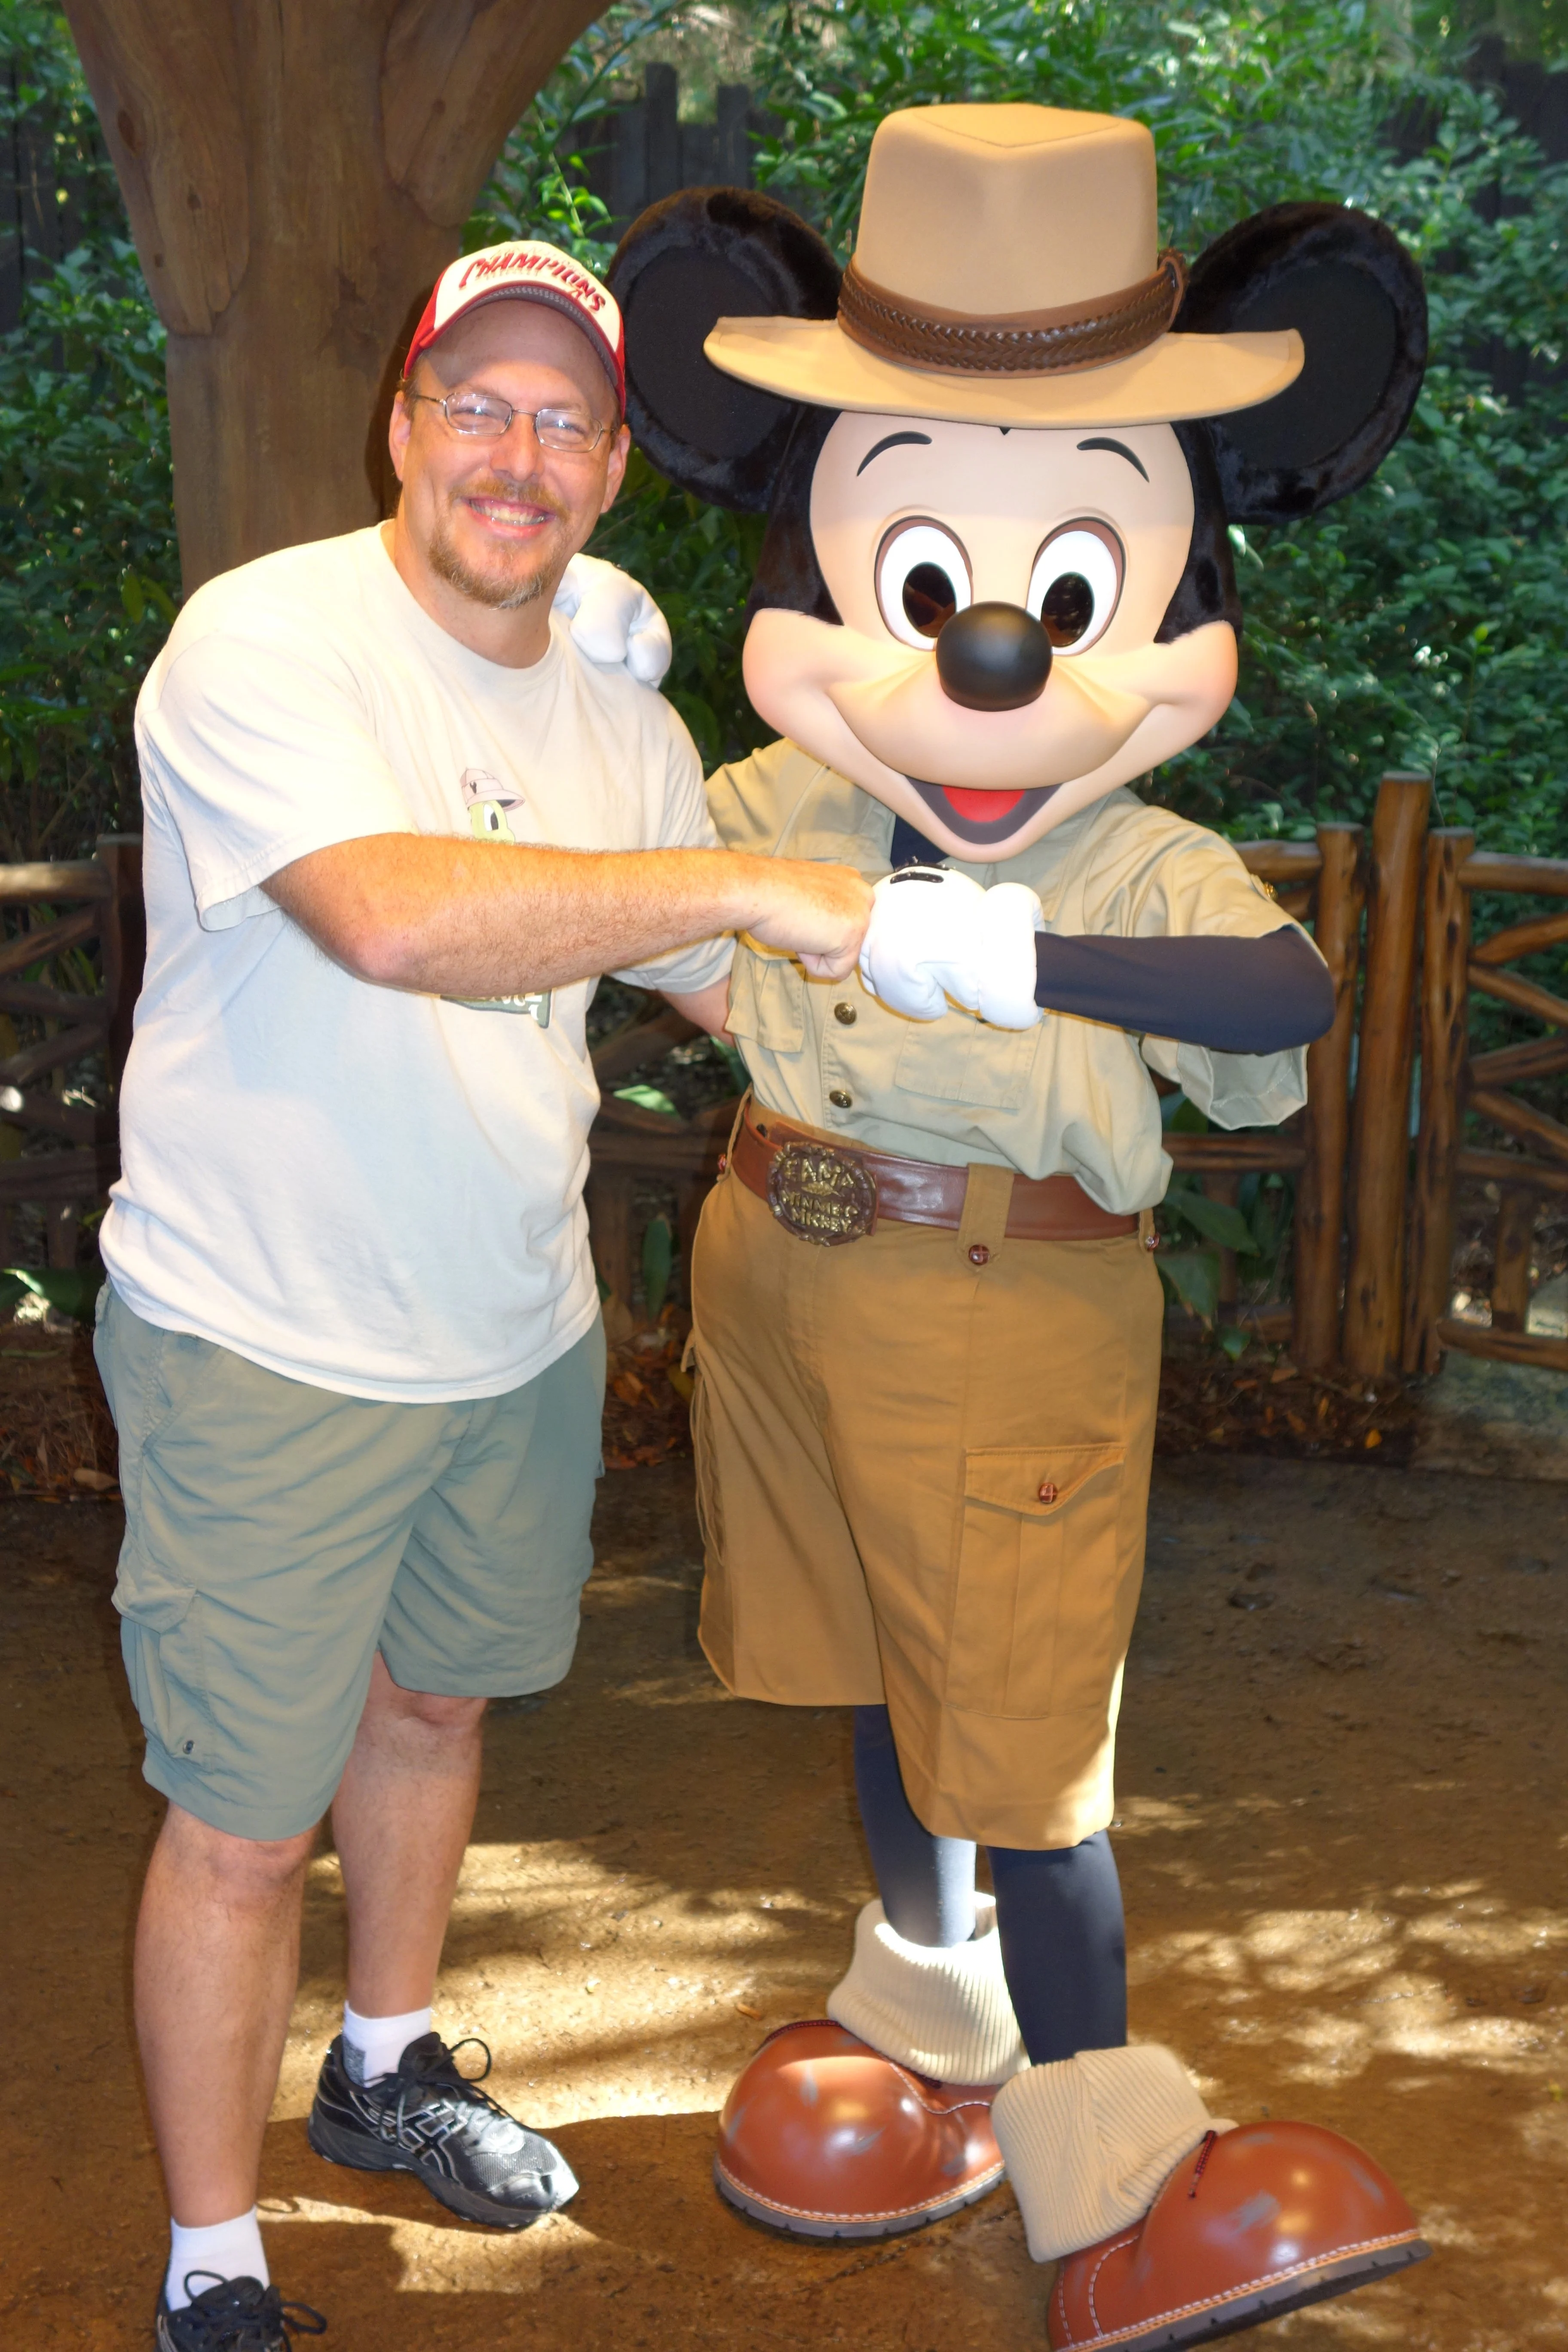 Mickey Mouse in Animal Kingdom 2012